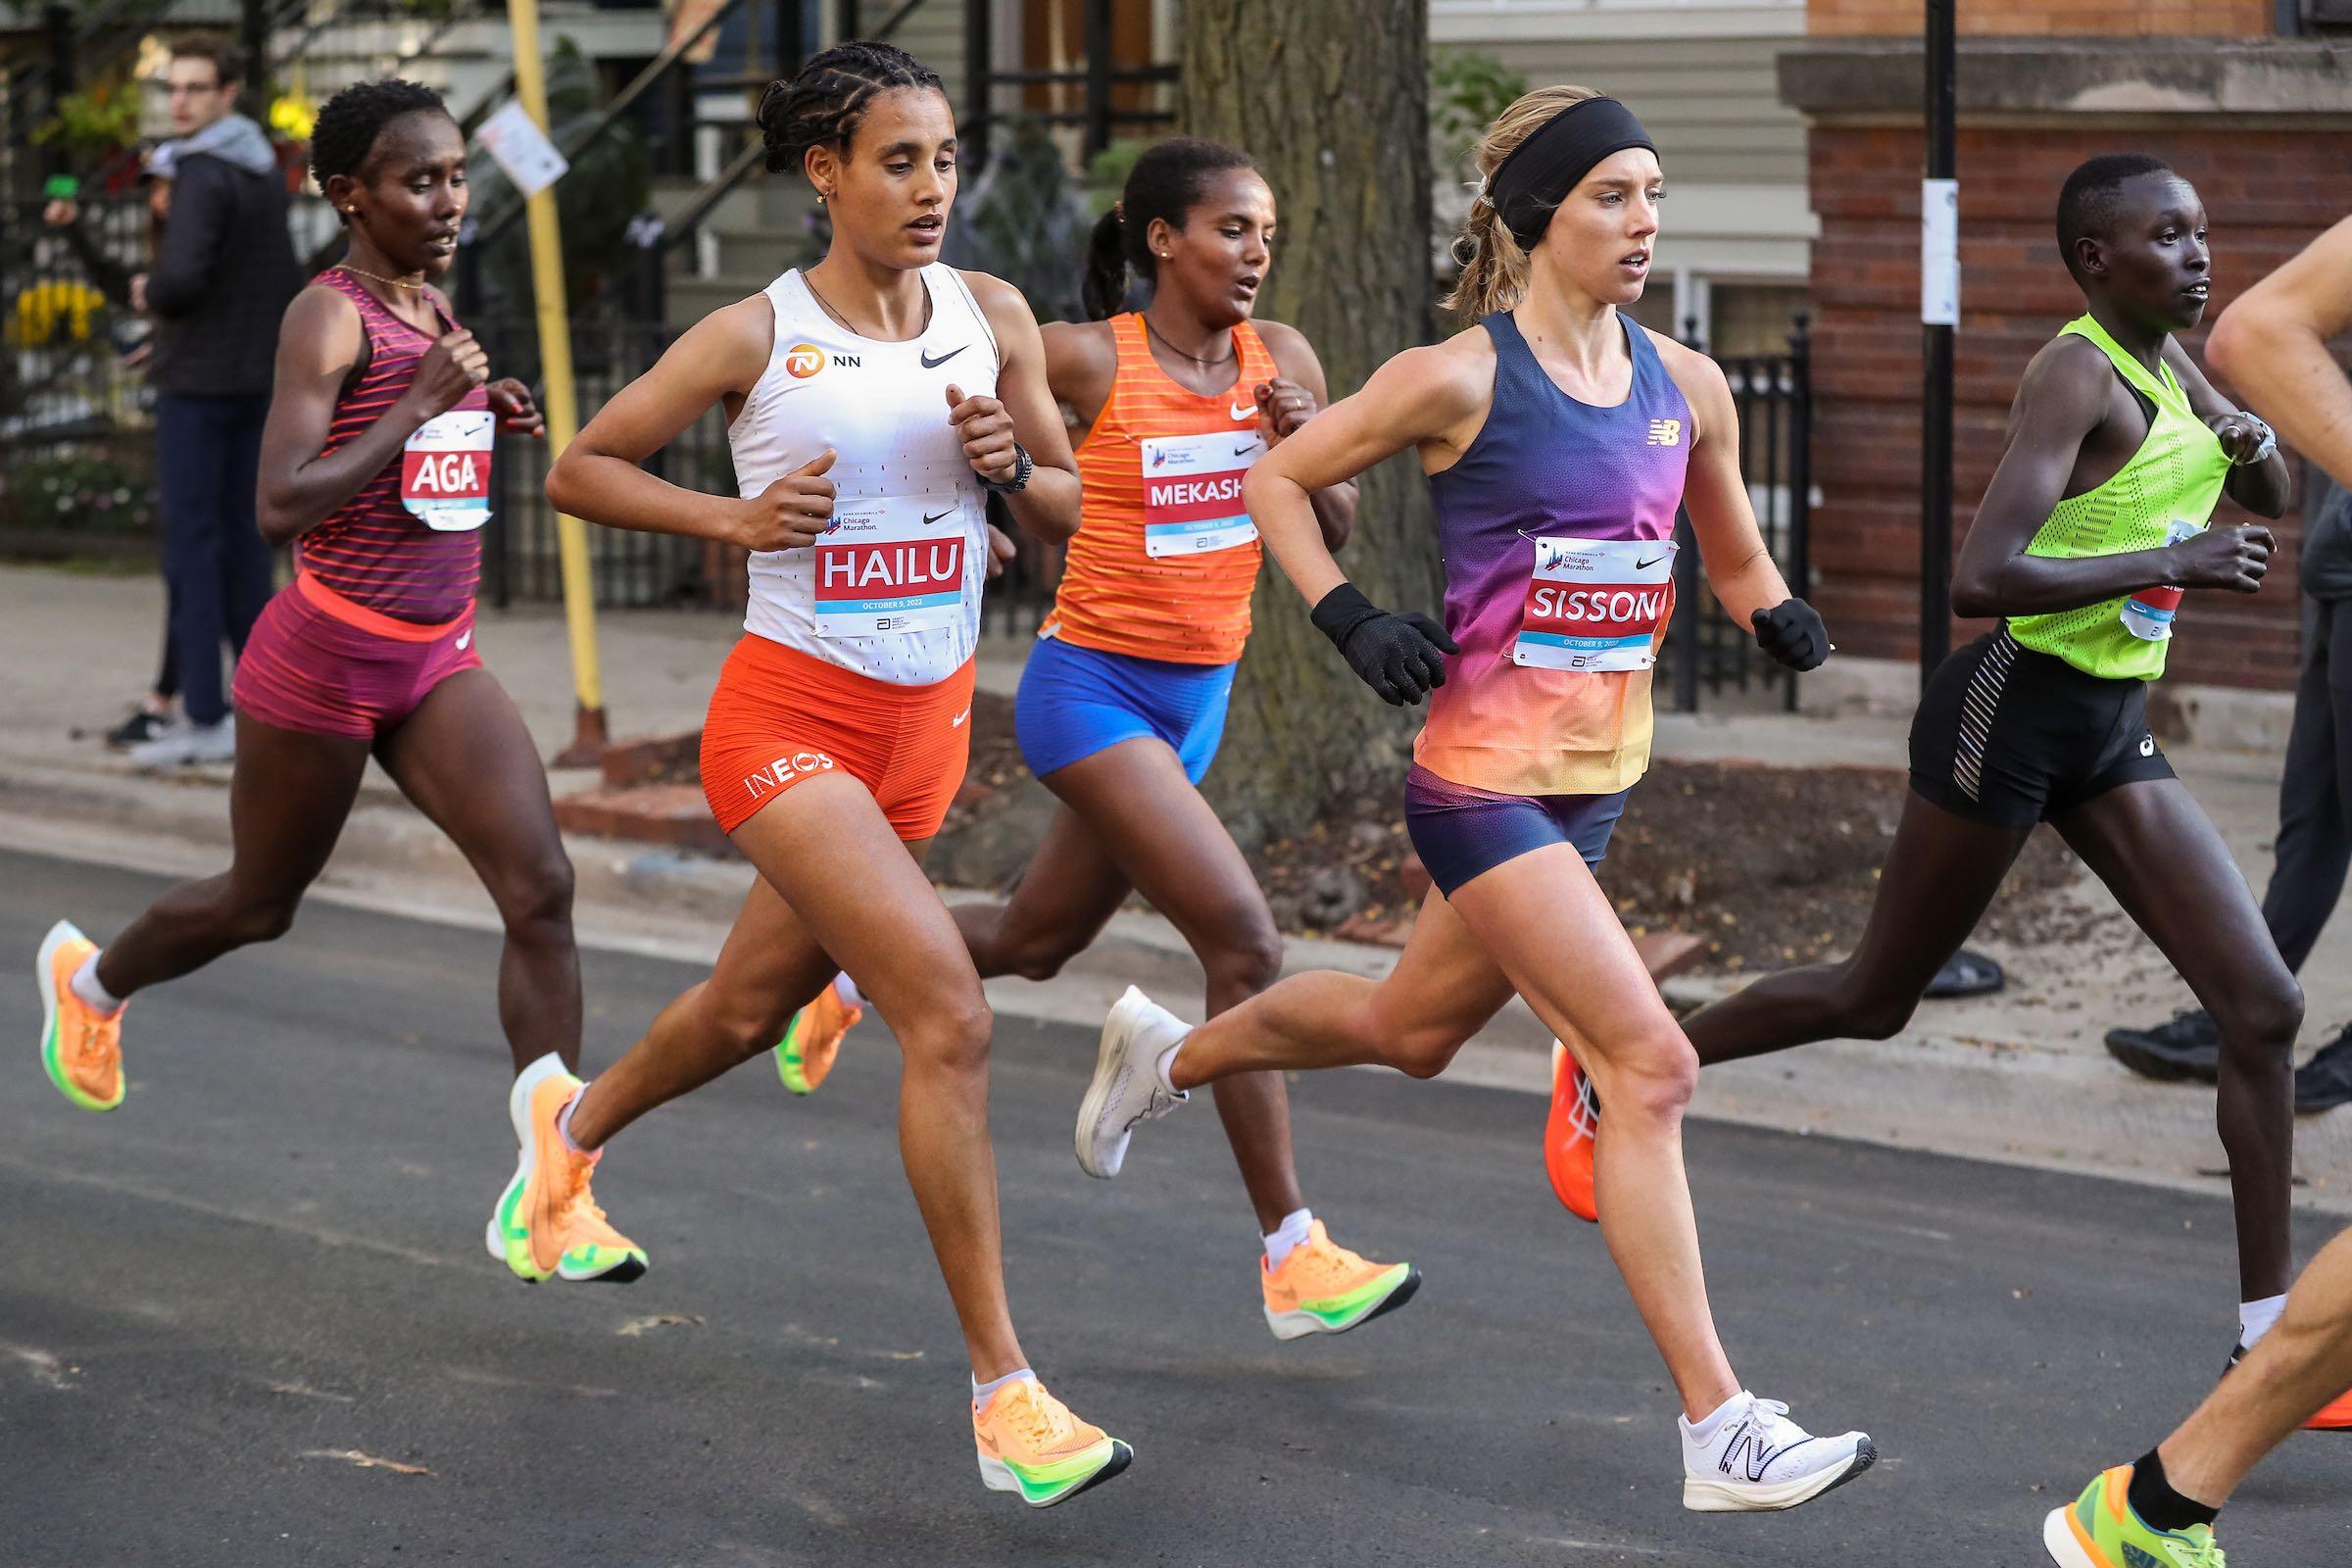 Emily Sisson finished second in 2022 and set an American women's record. She'll be in the hunt again on Sunday. (Kevin Morris / 2022 Bank of America Chicago Marathon